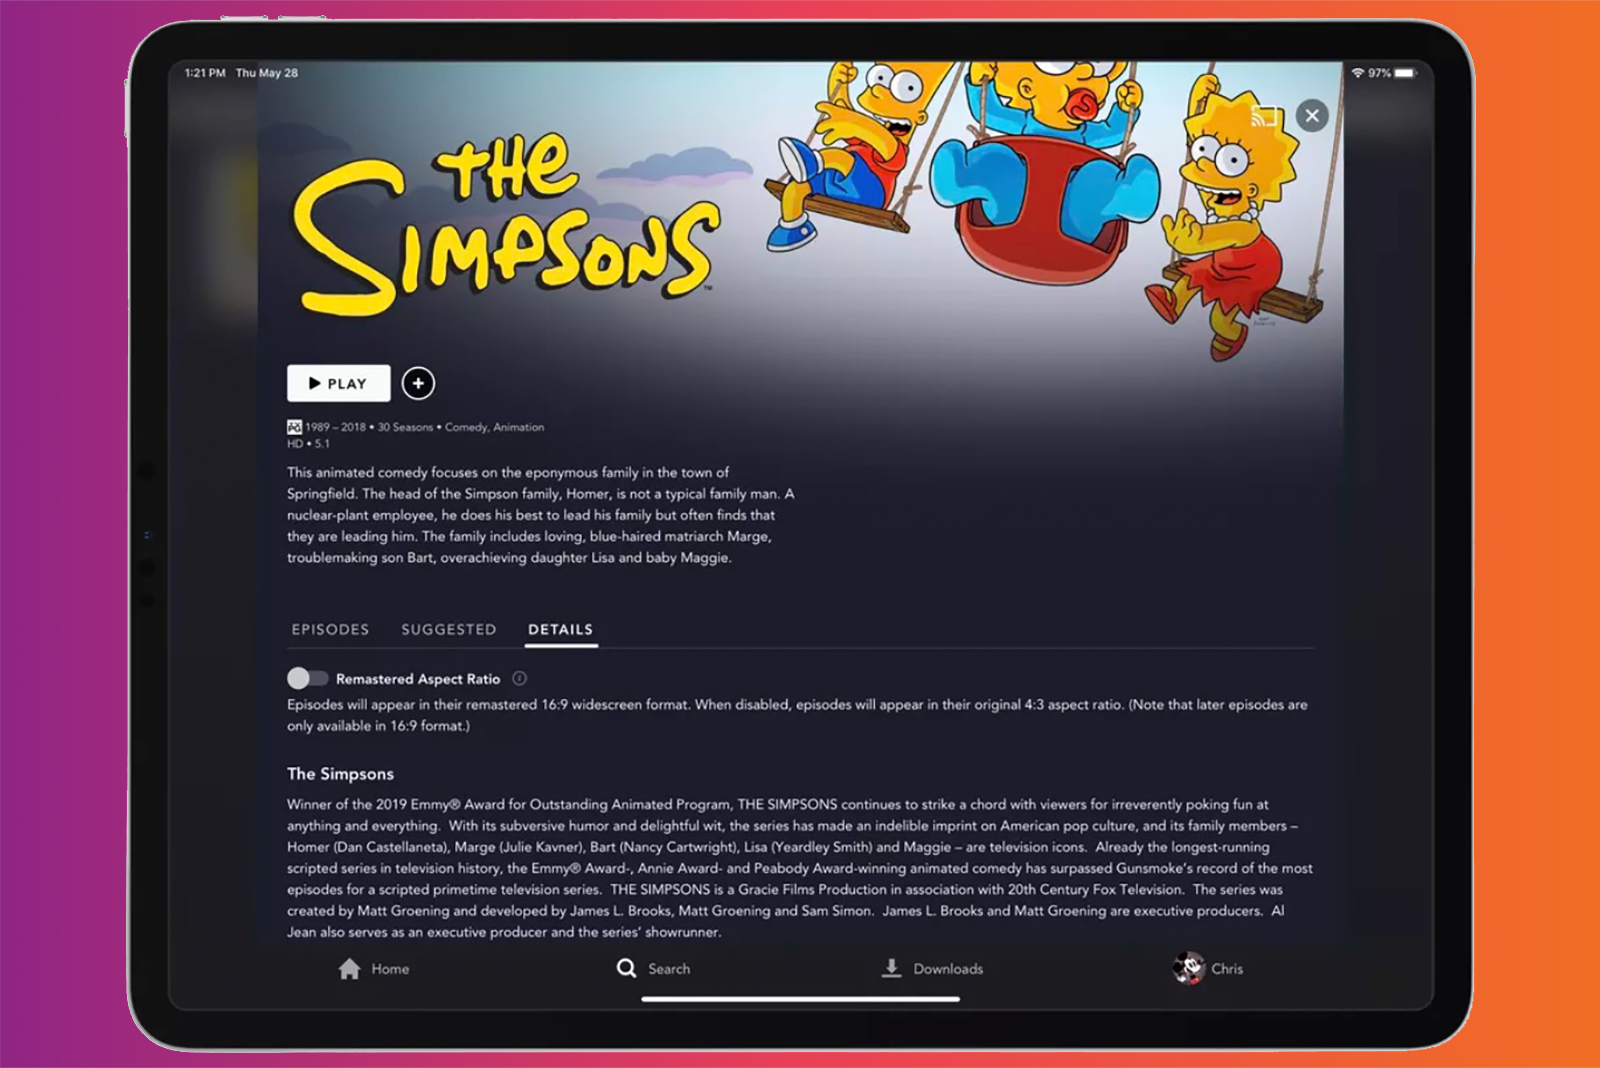 How to watch The Simpsons in its original 43 aspect ratio on Disney image 1